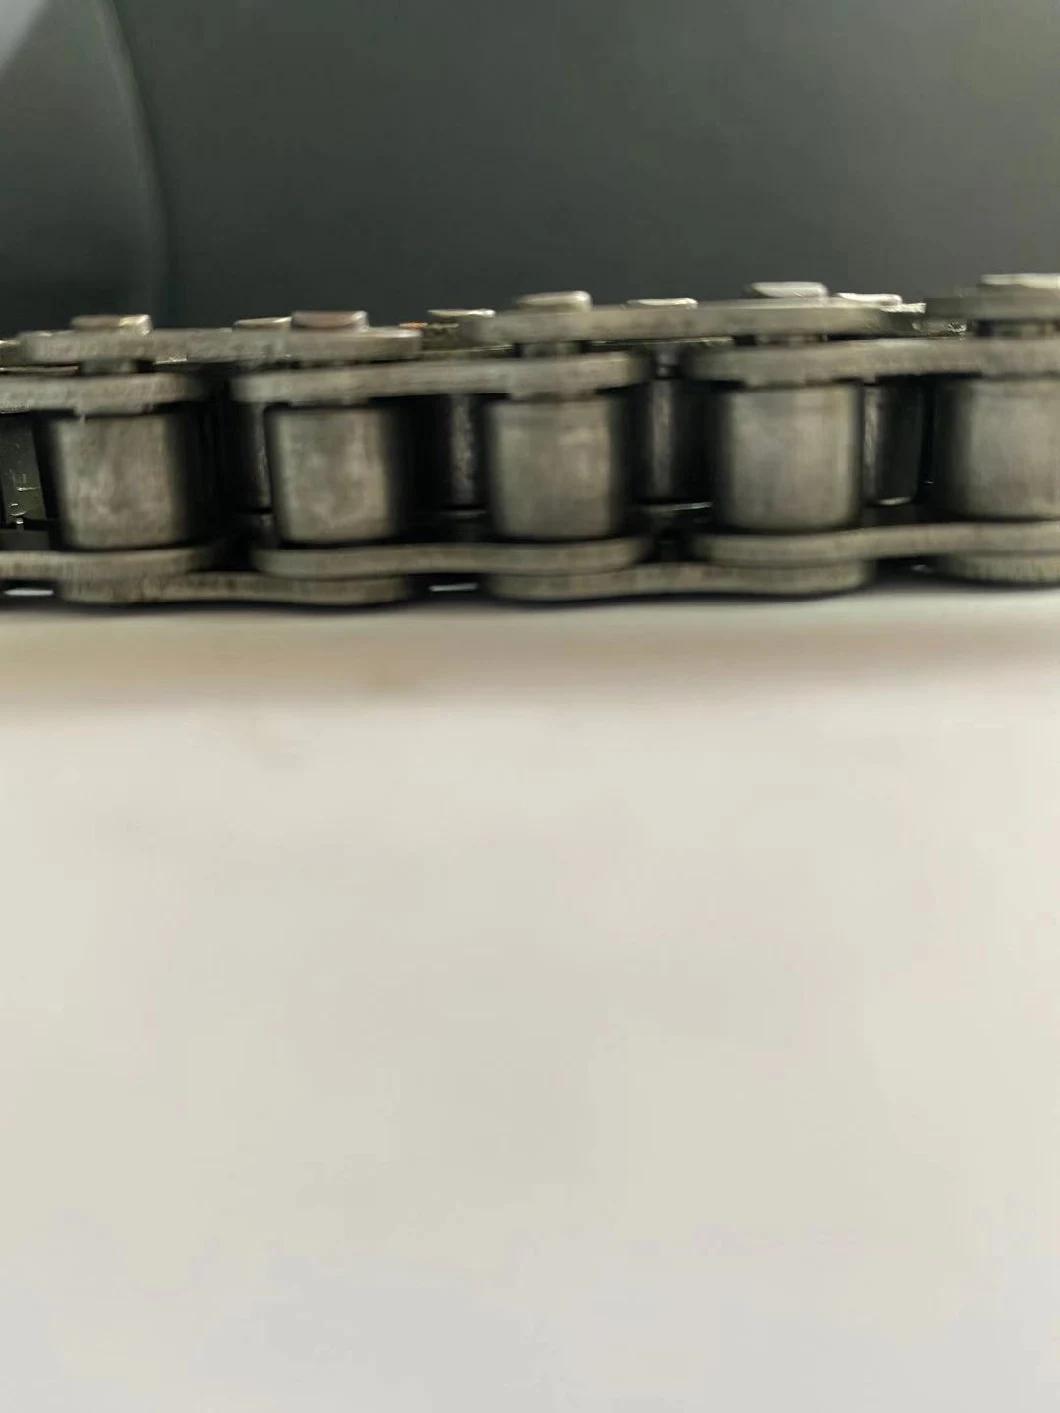 Stainless Steel Chain Roller Motor Motorcycle Chain